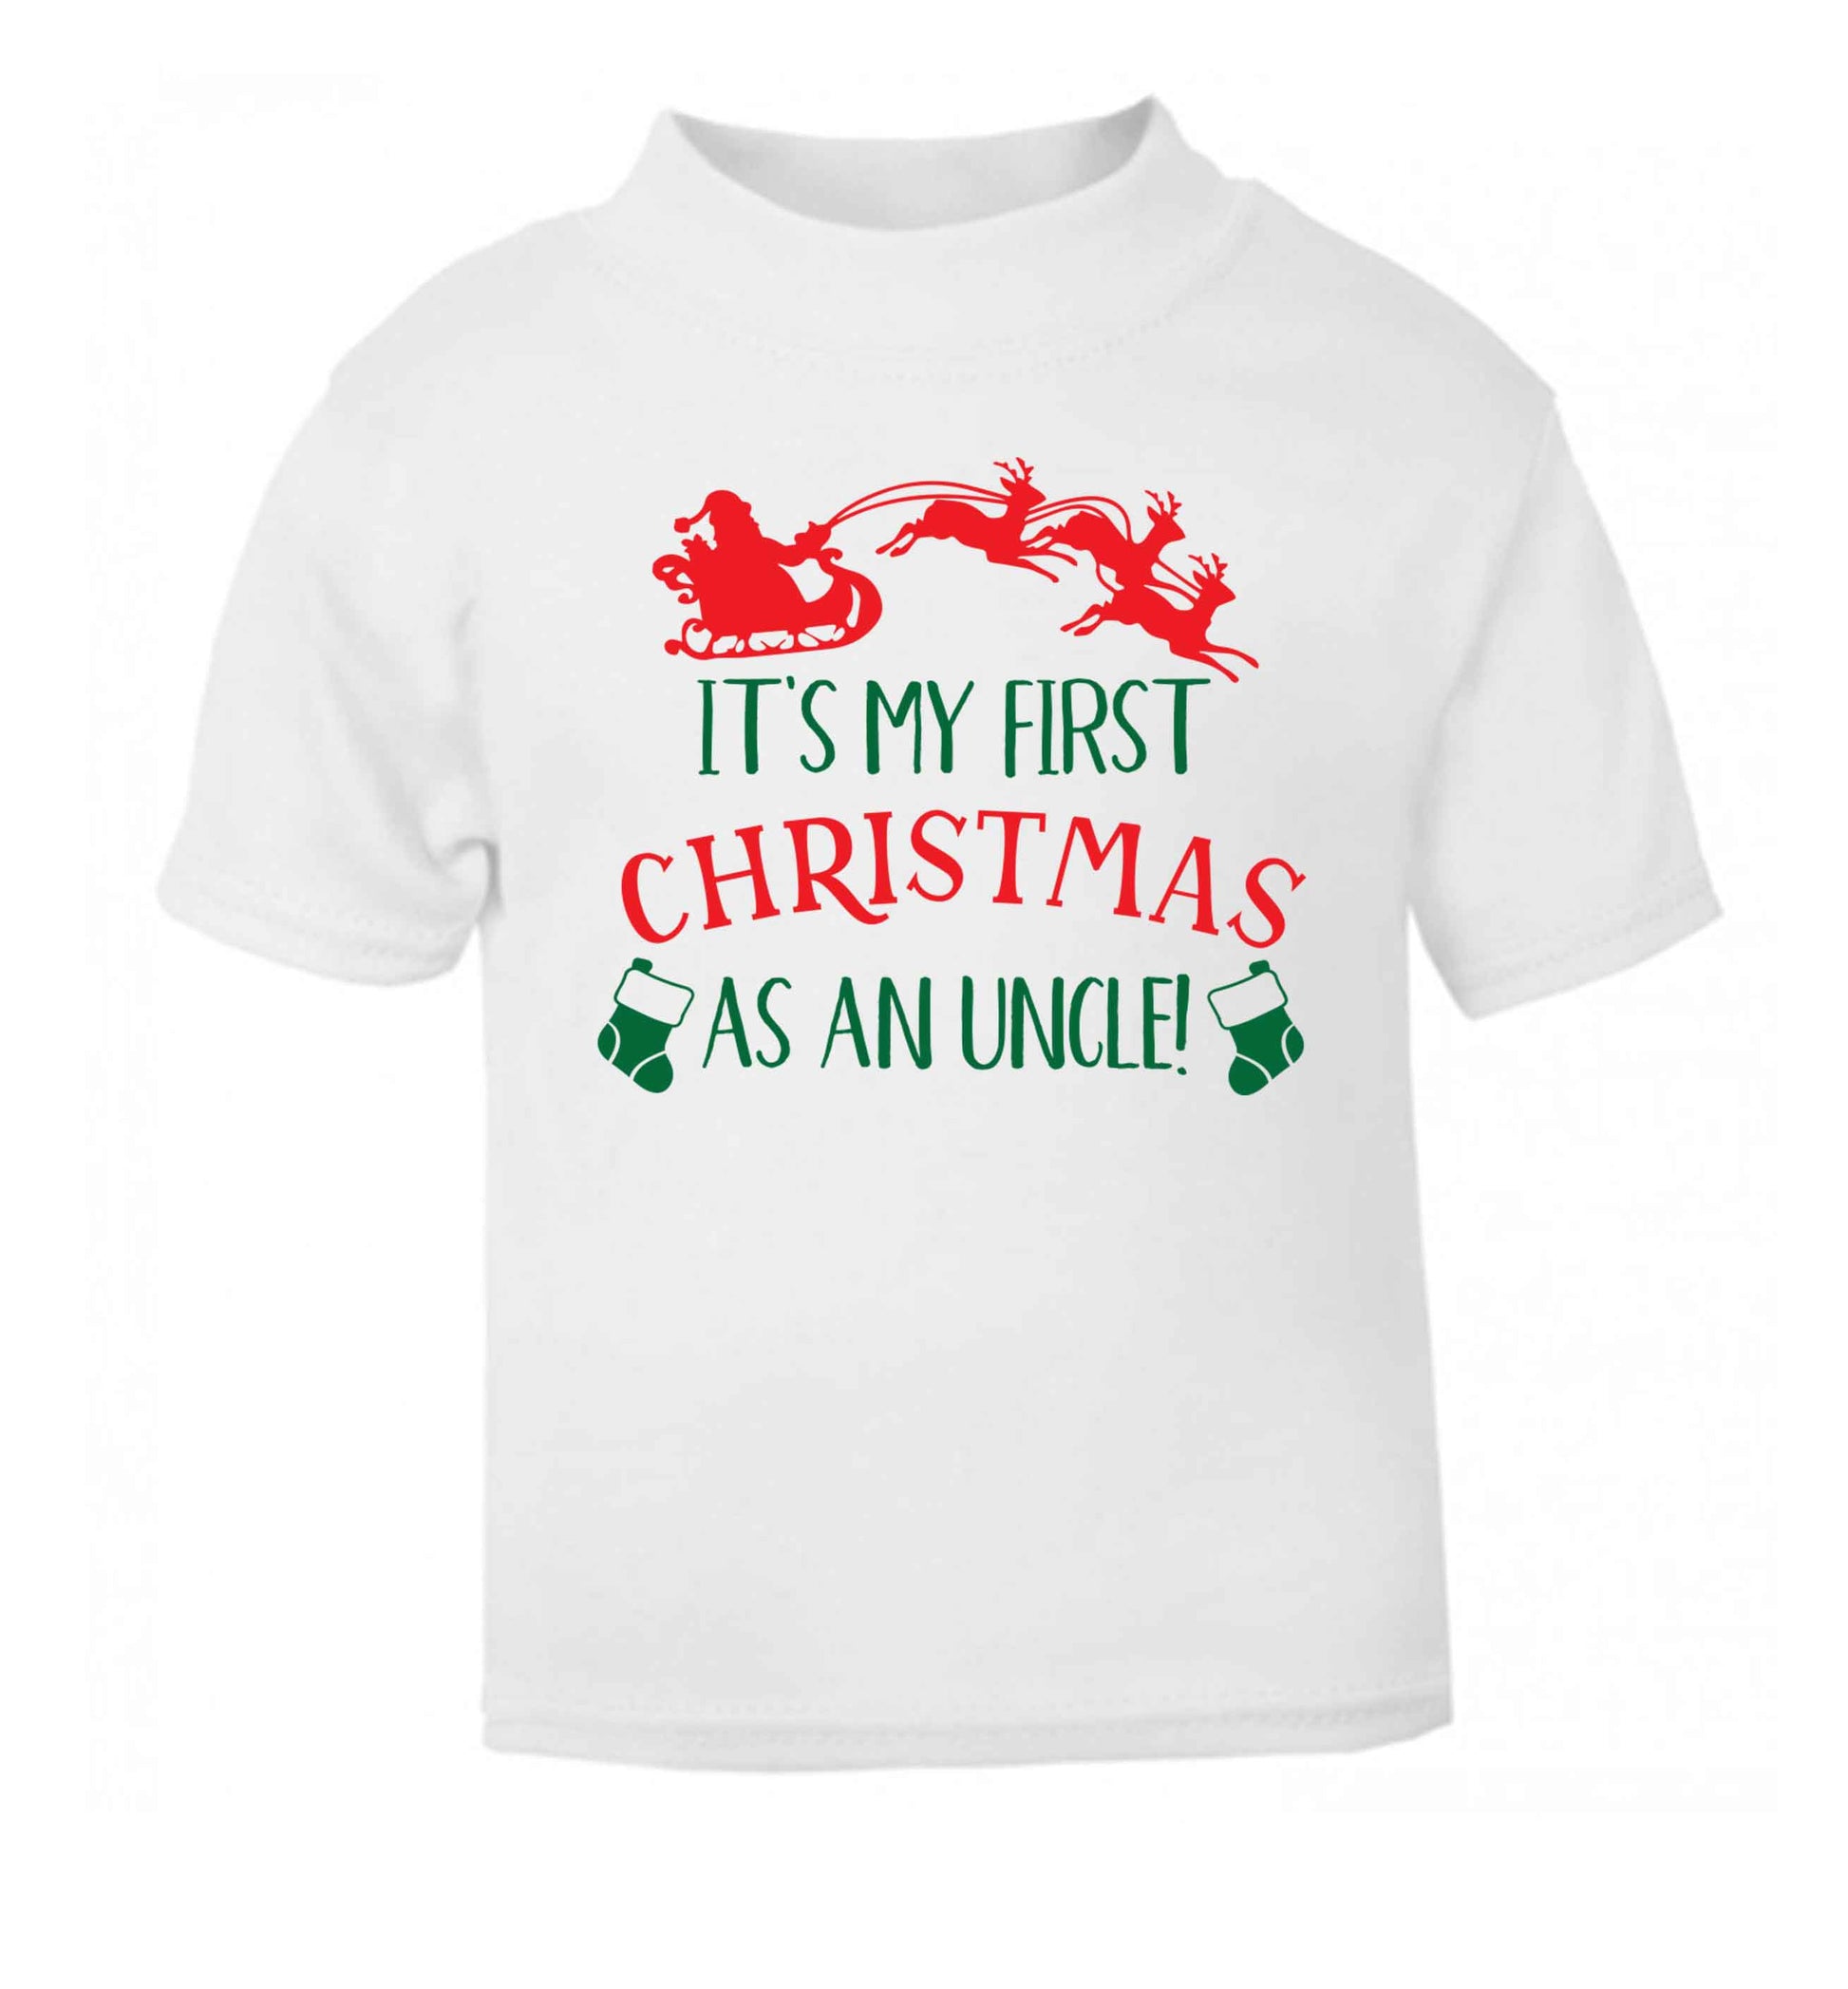 It's my first Christmas as an uncle! white Baby Toddler Tshirt 2 Years